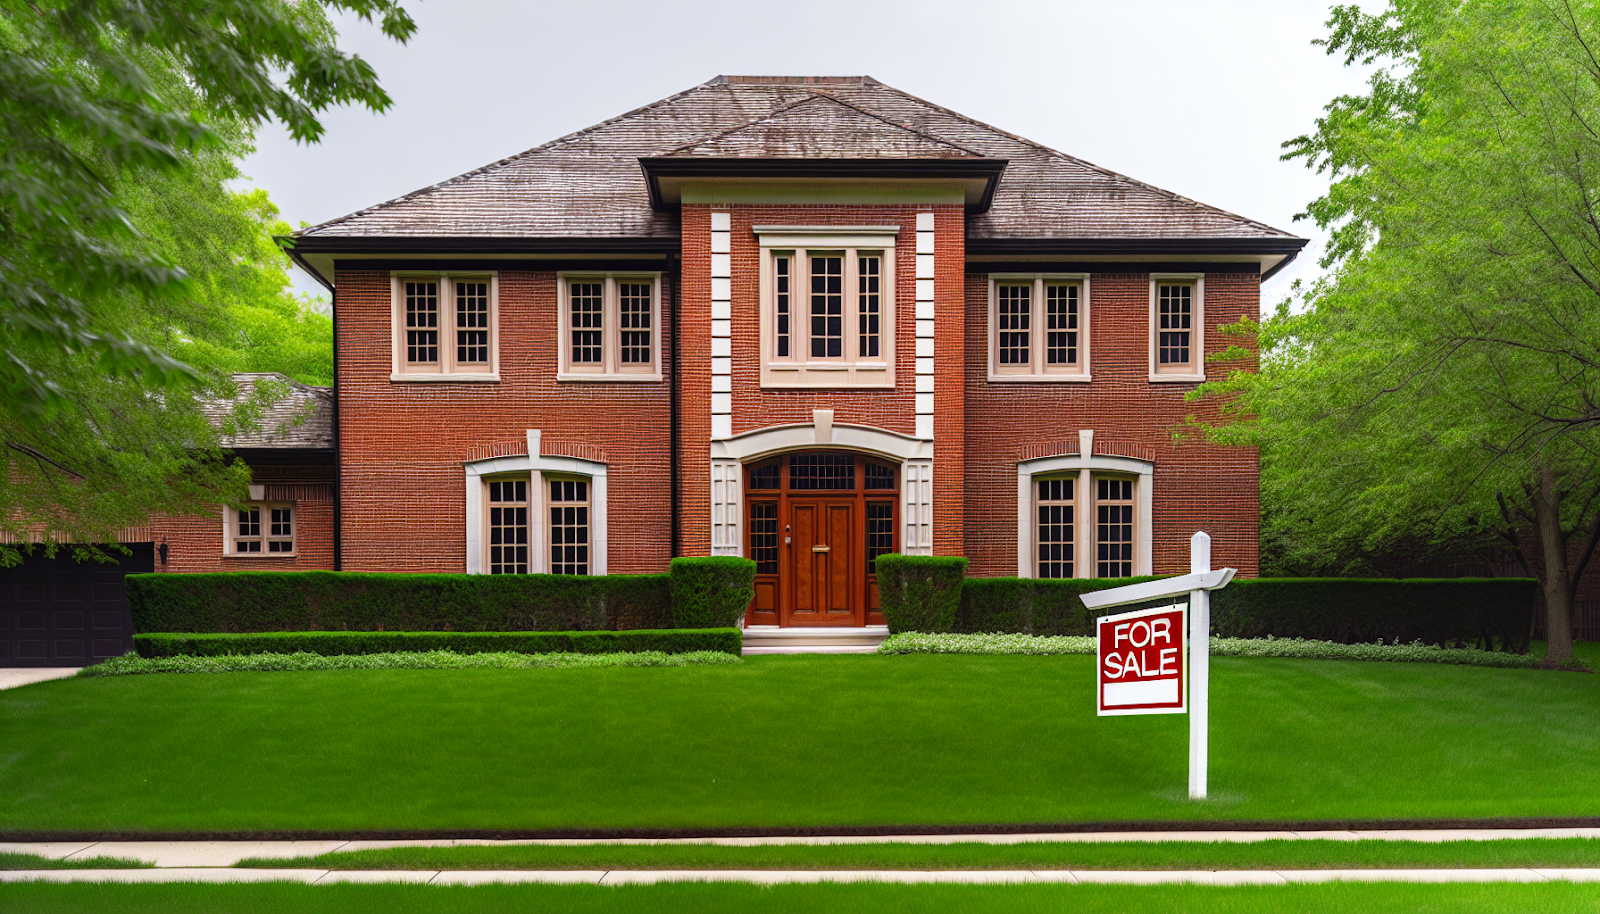 Assessing the Pros and Cons of a Brick House: Is It Right for You?